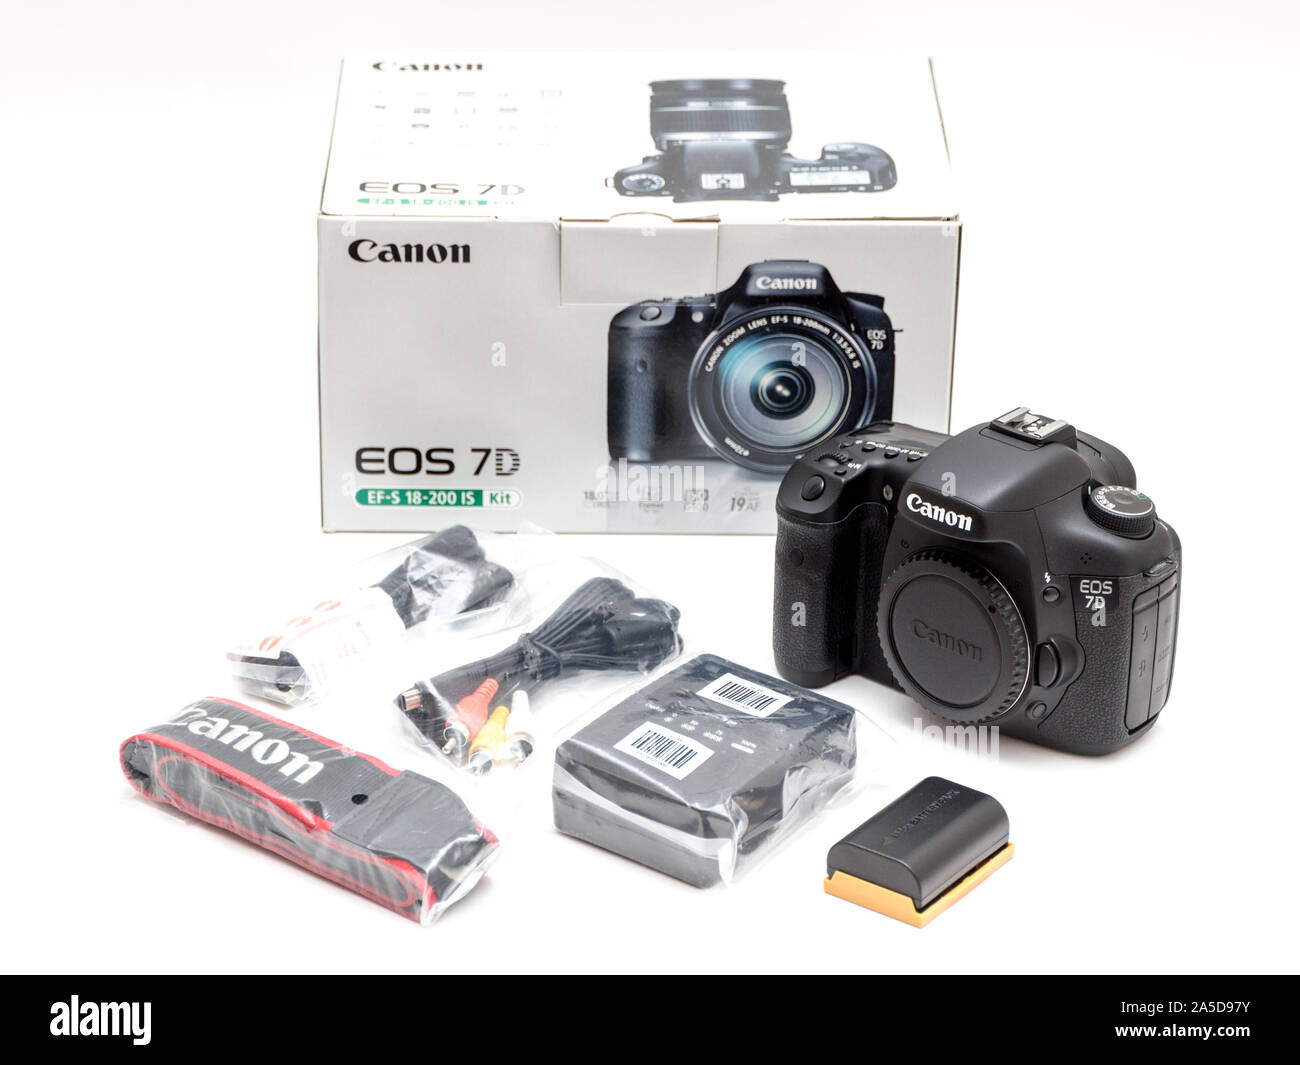 Rome, Italy - March 06, 2019: Canon 7D dslr camera with accessories still life Stock Photo